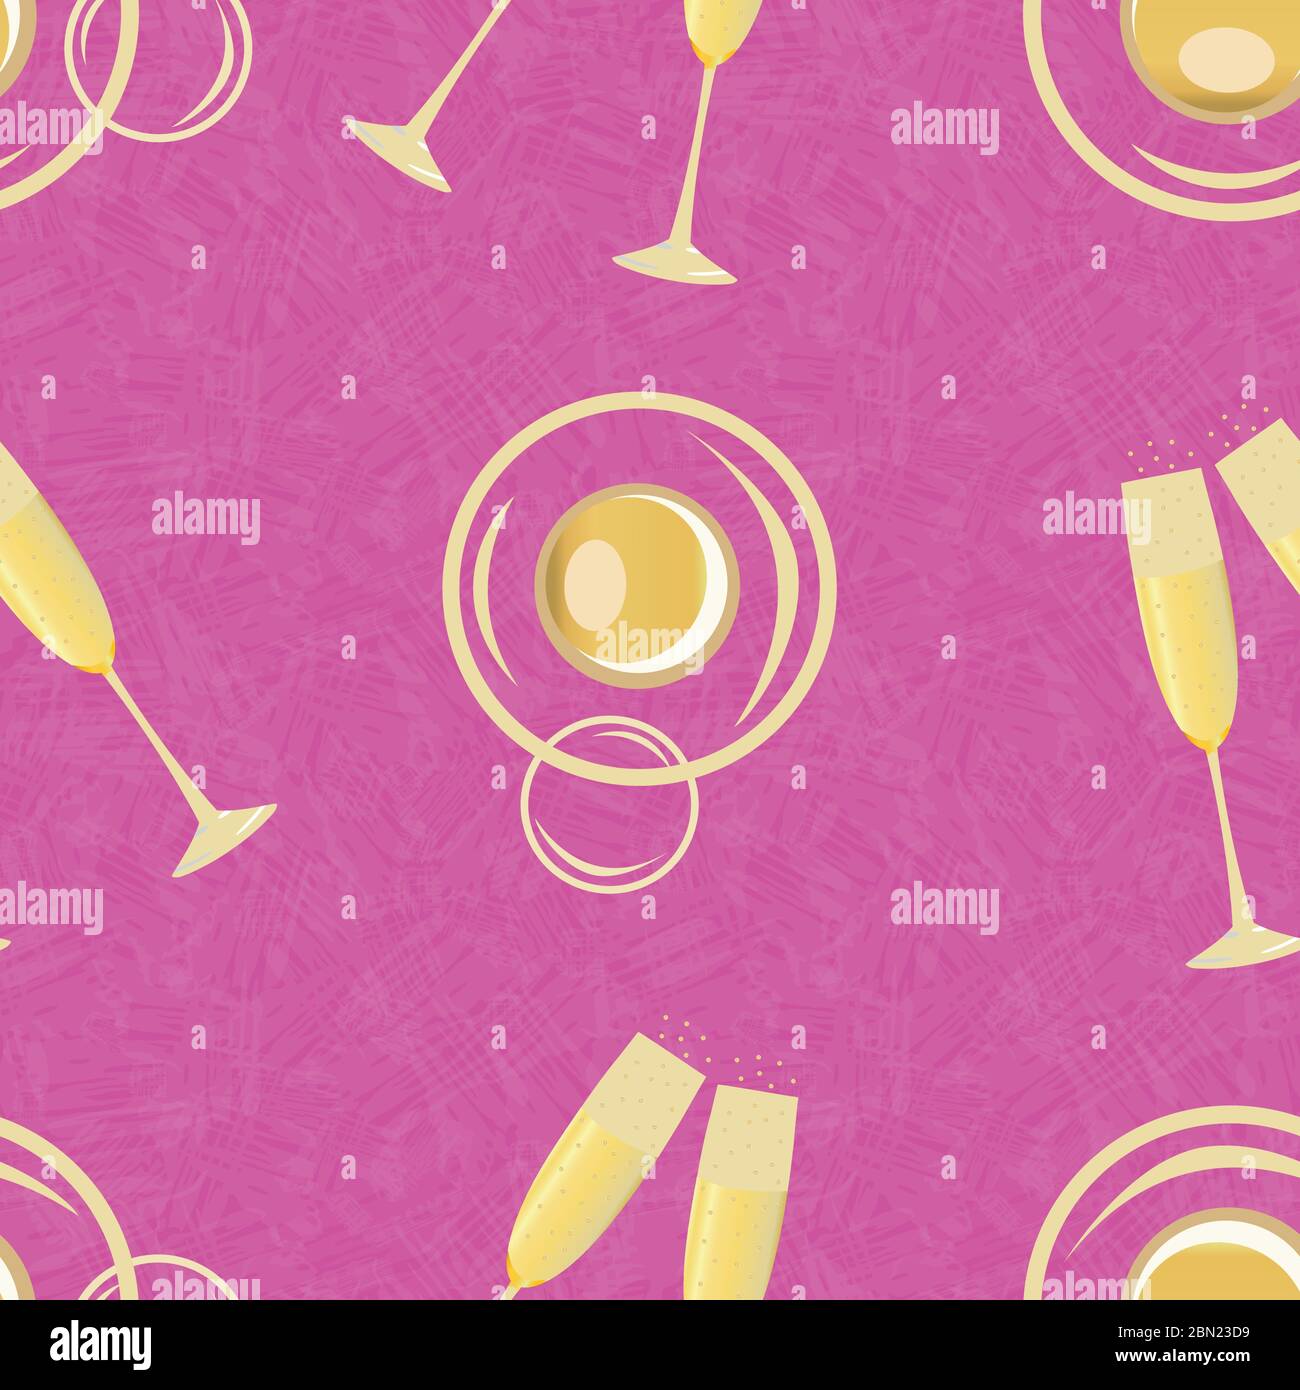 Champagne bubbles vector seamless pattern background. Hand drawn glasses, fizzy drink gold pink textured backdrop. Stylish sparkling wine repeat Stock Vector